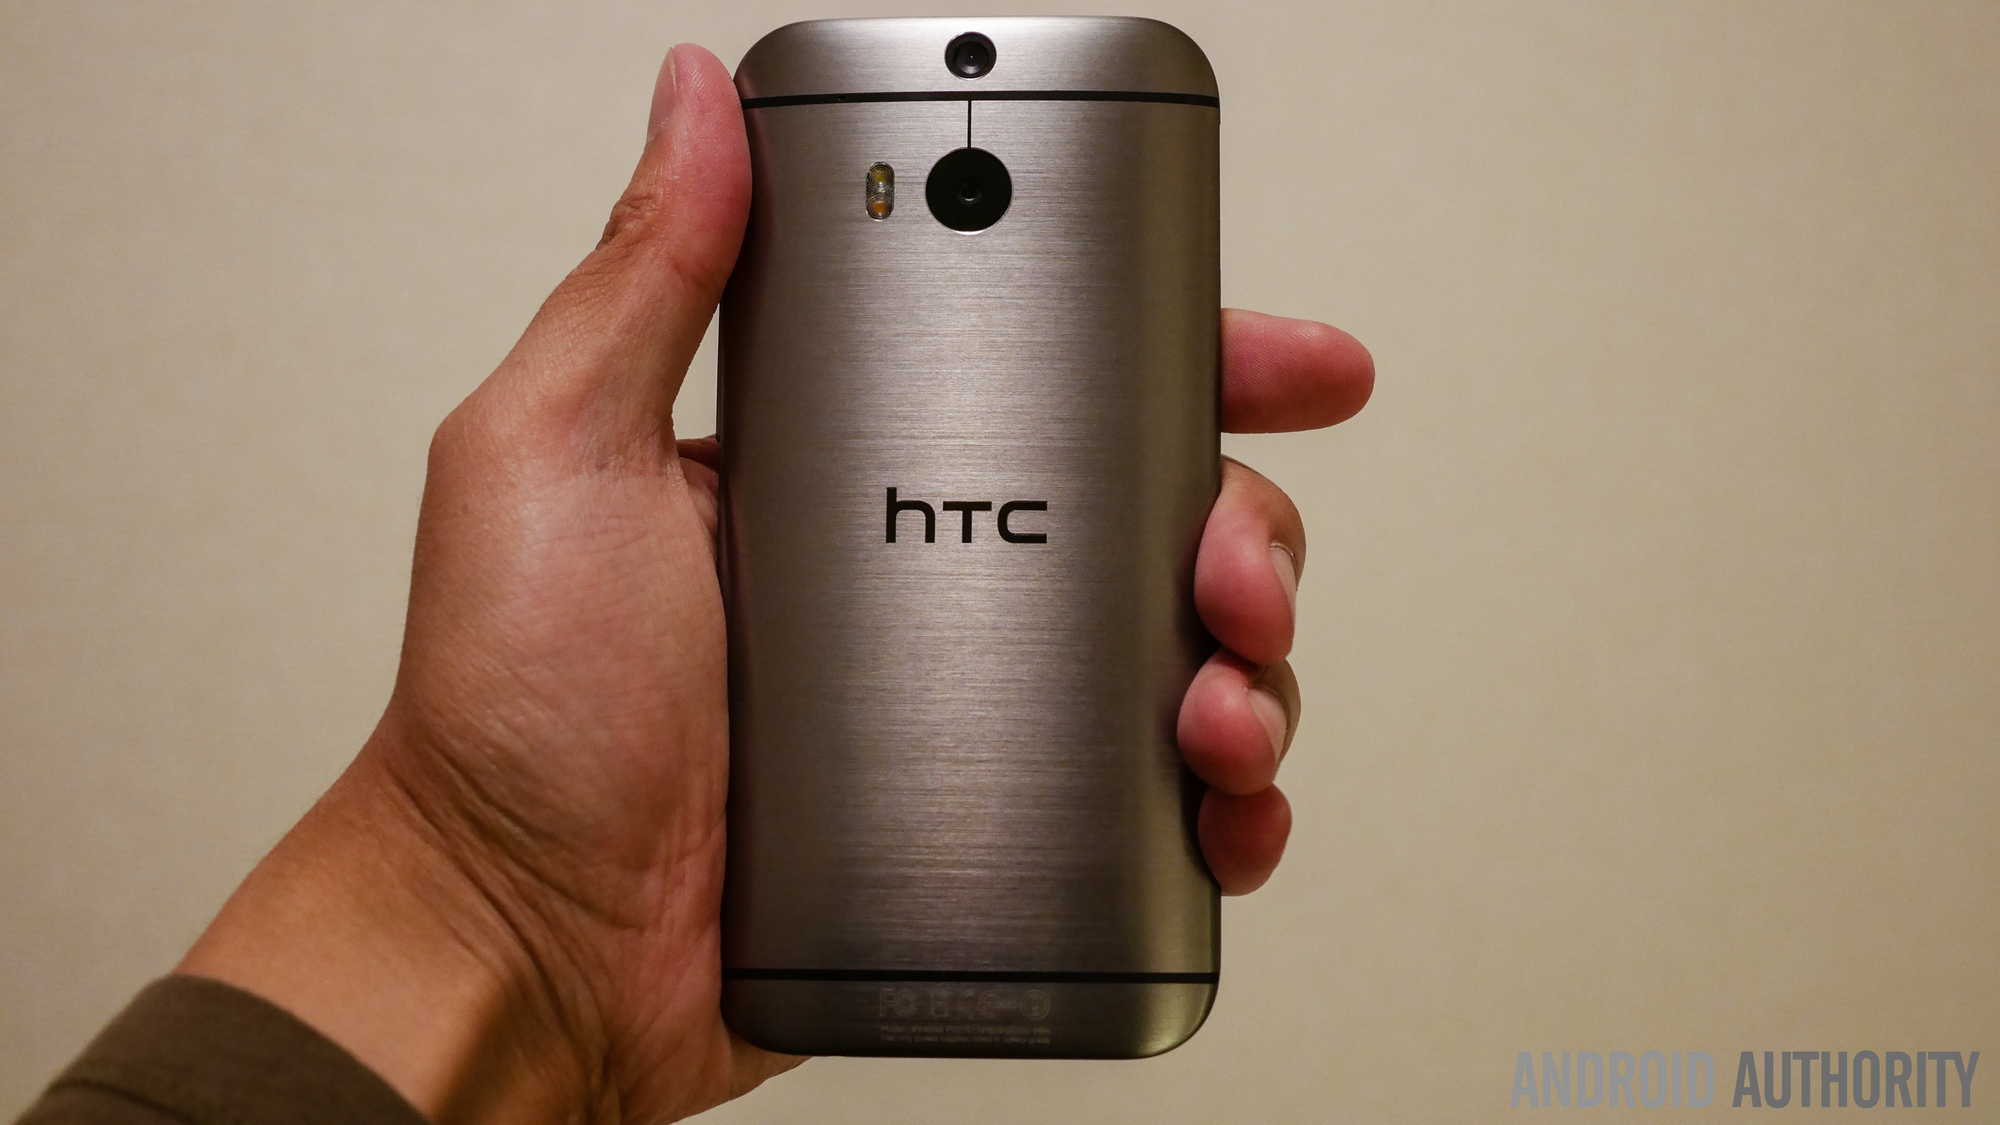 htc-one-m8-launch-aa-14-of-27 resized